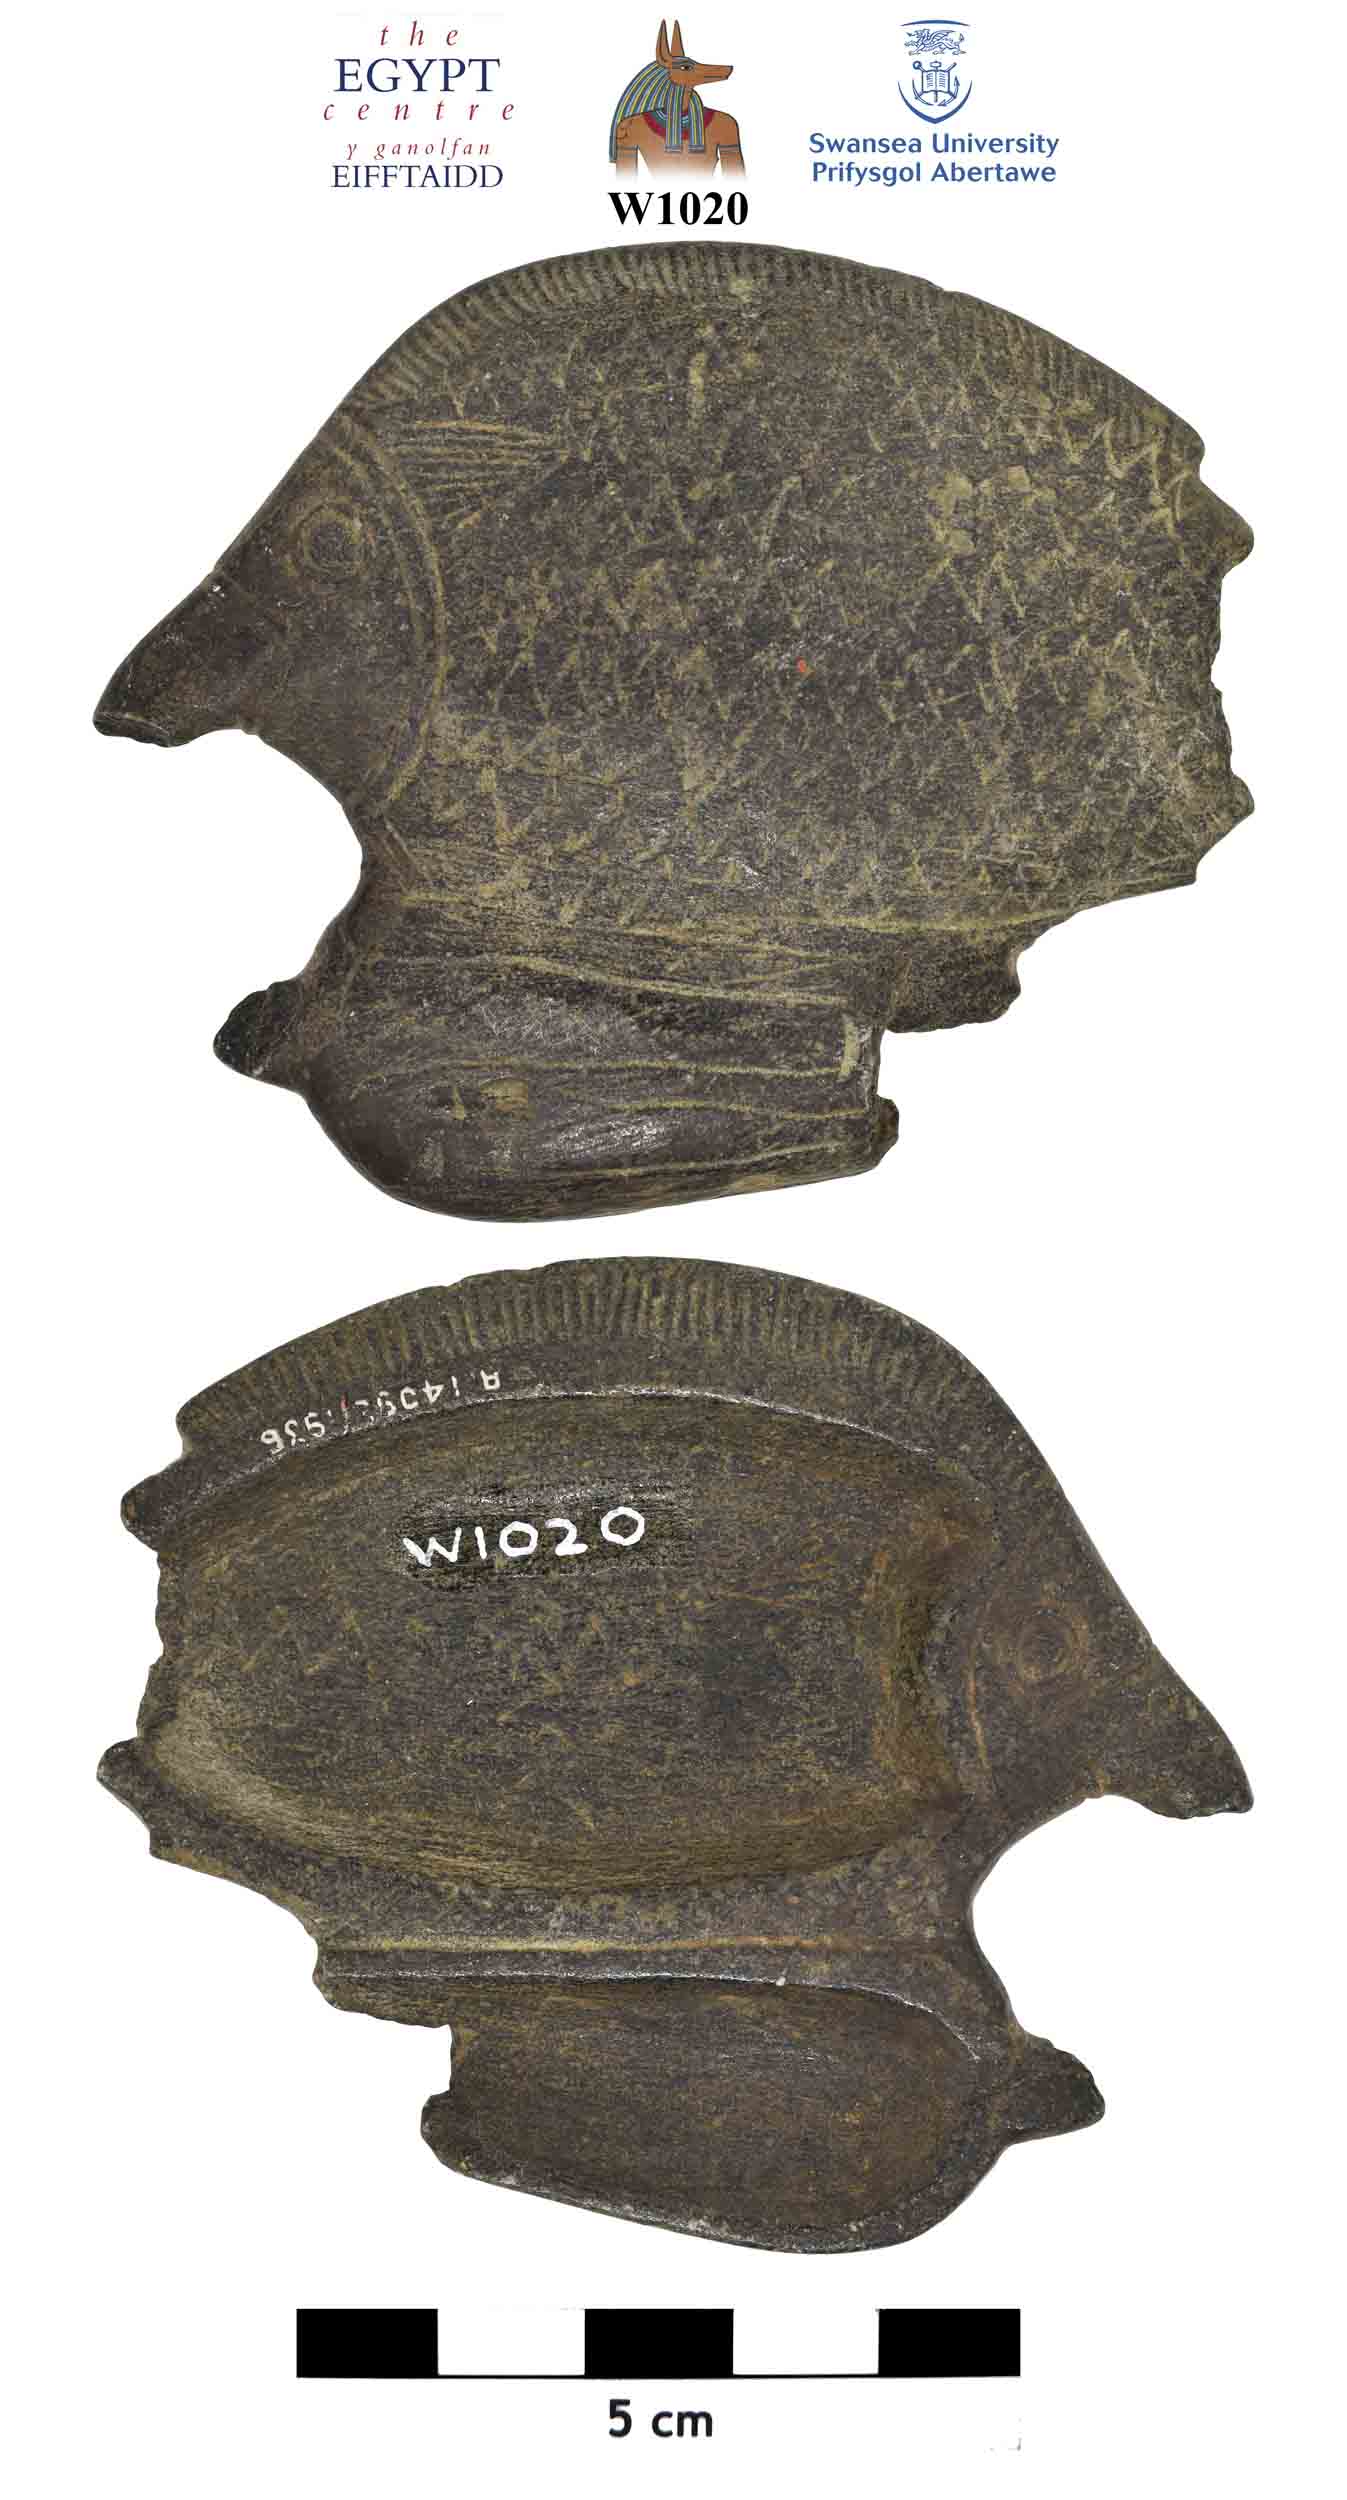 Image for: Stone dish in the shape of a fish